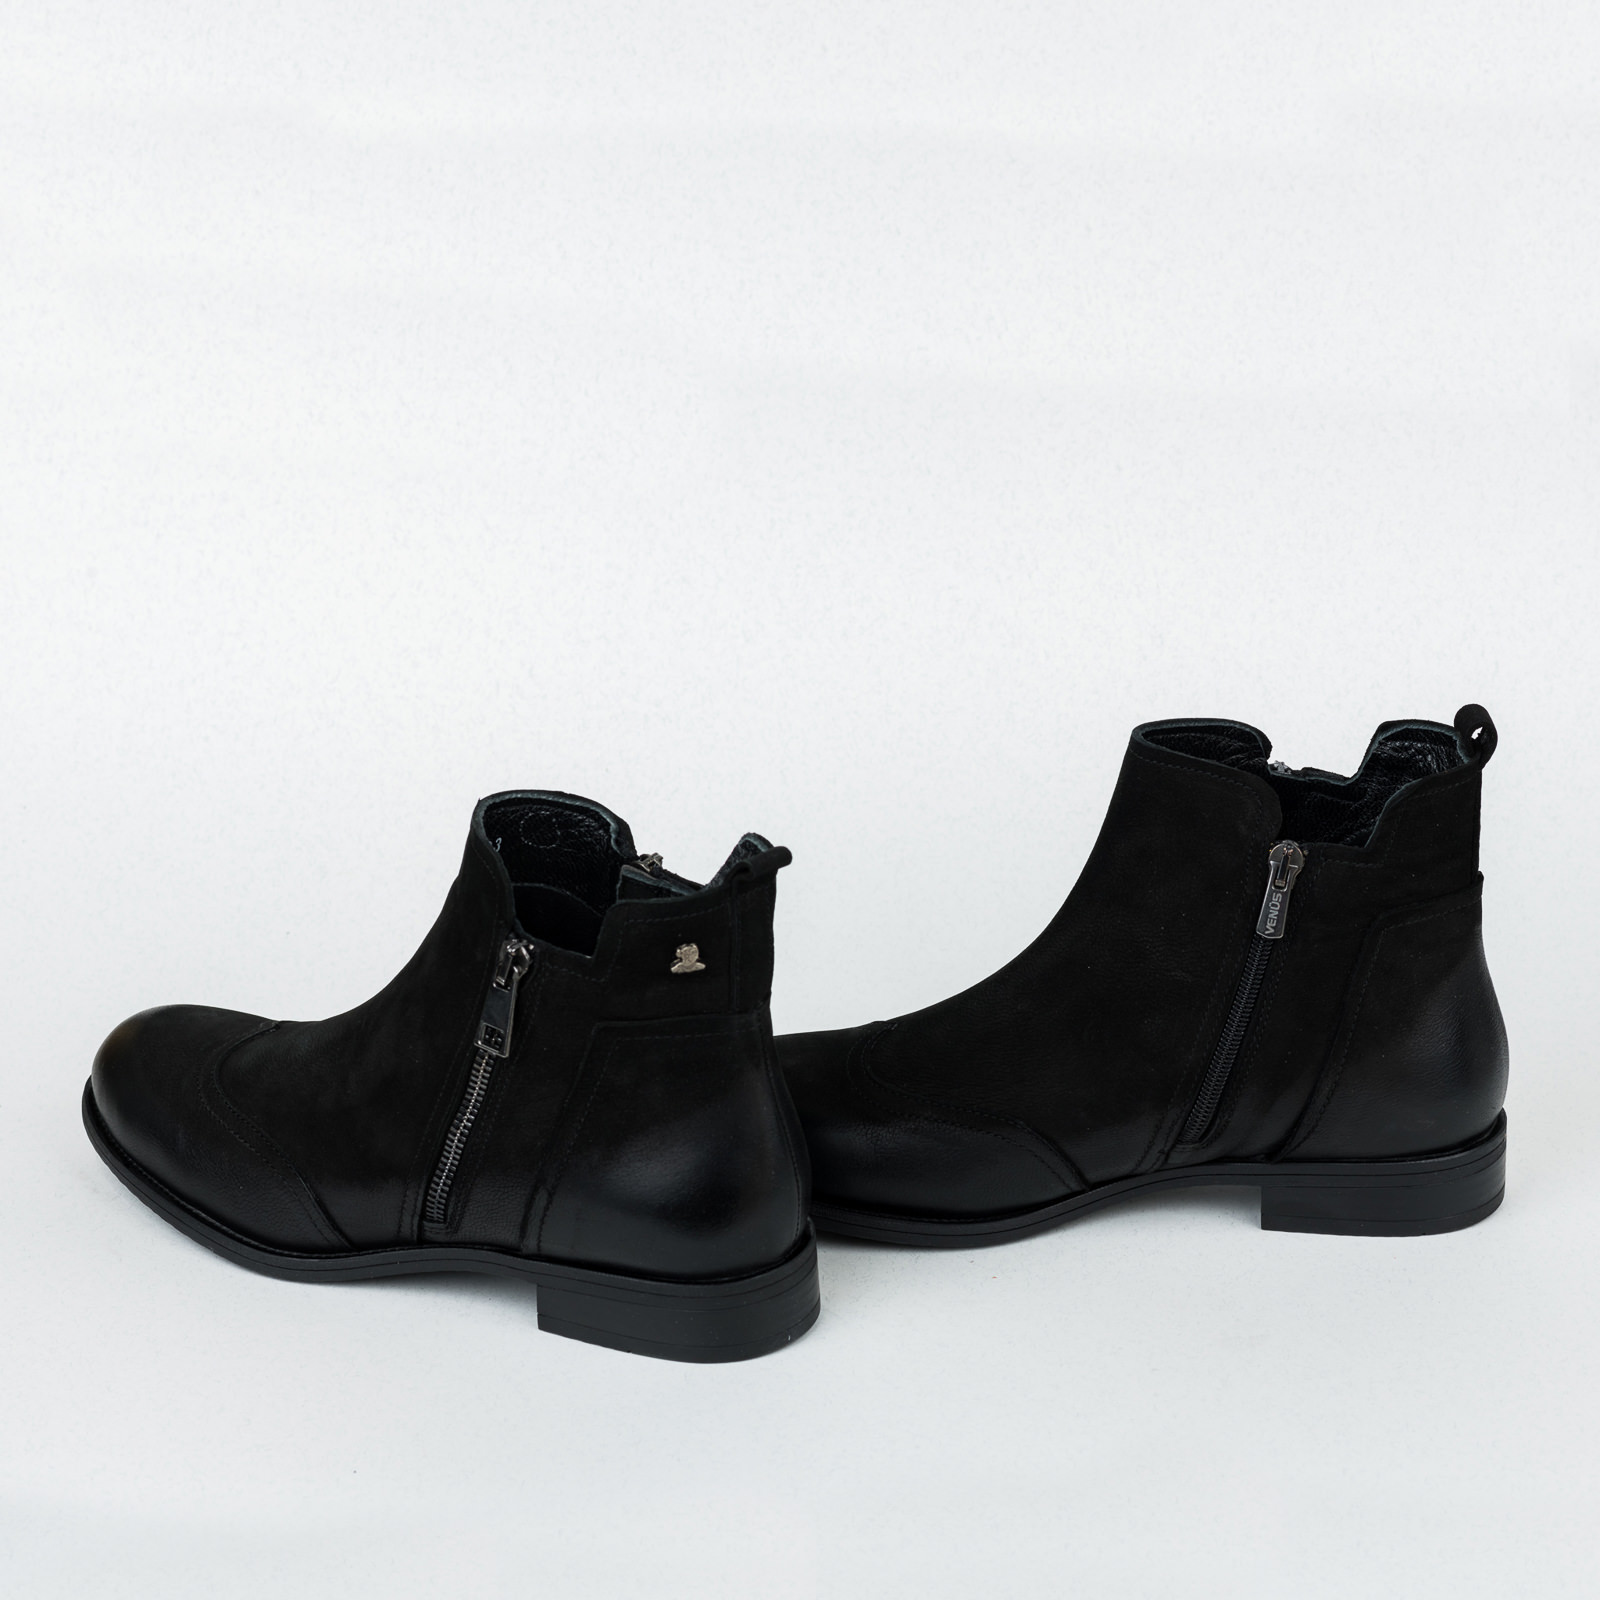 Leather ankle boots B442 - BLACK